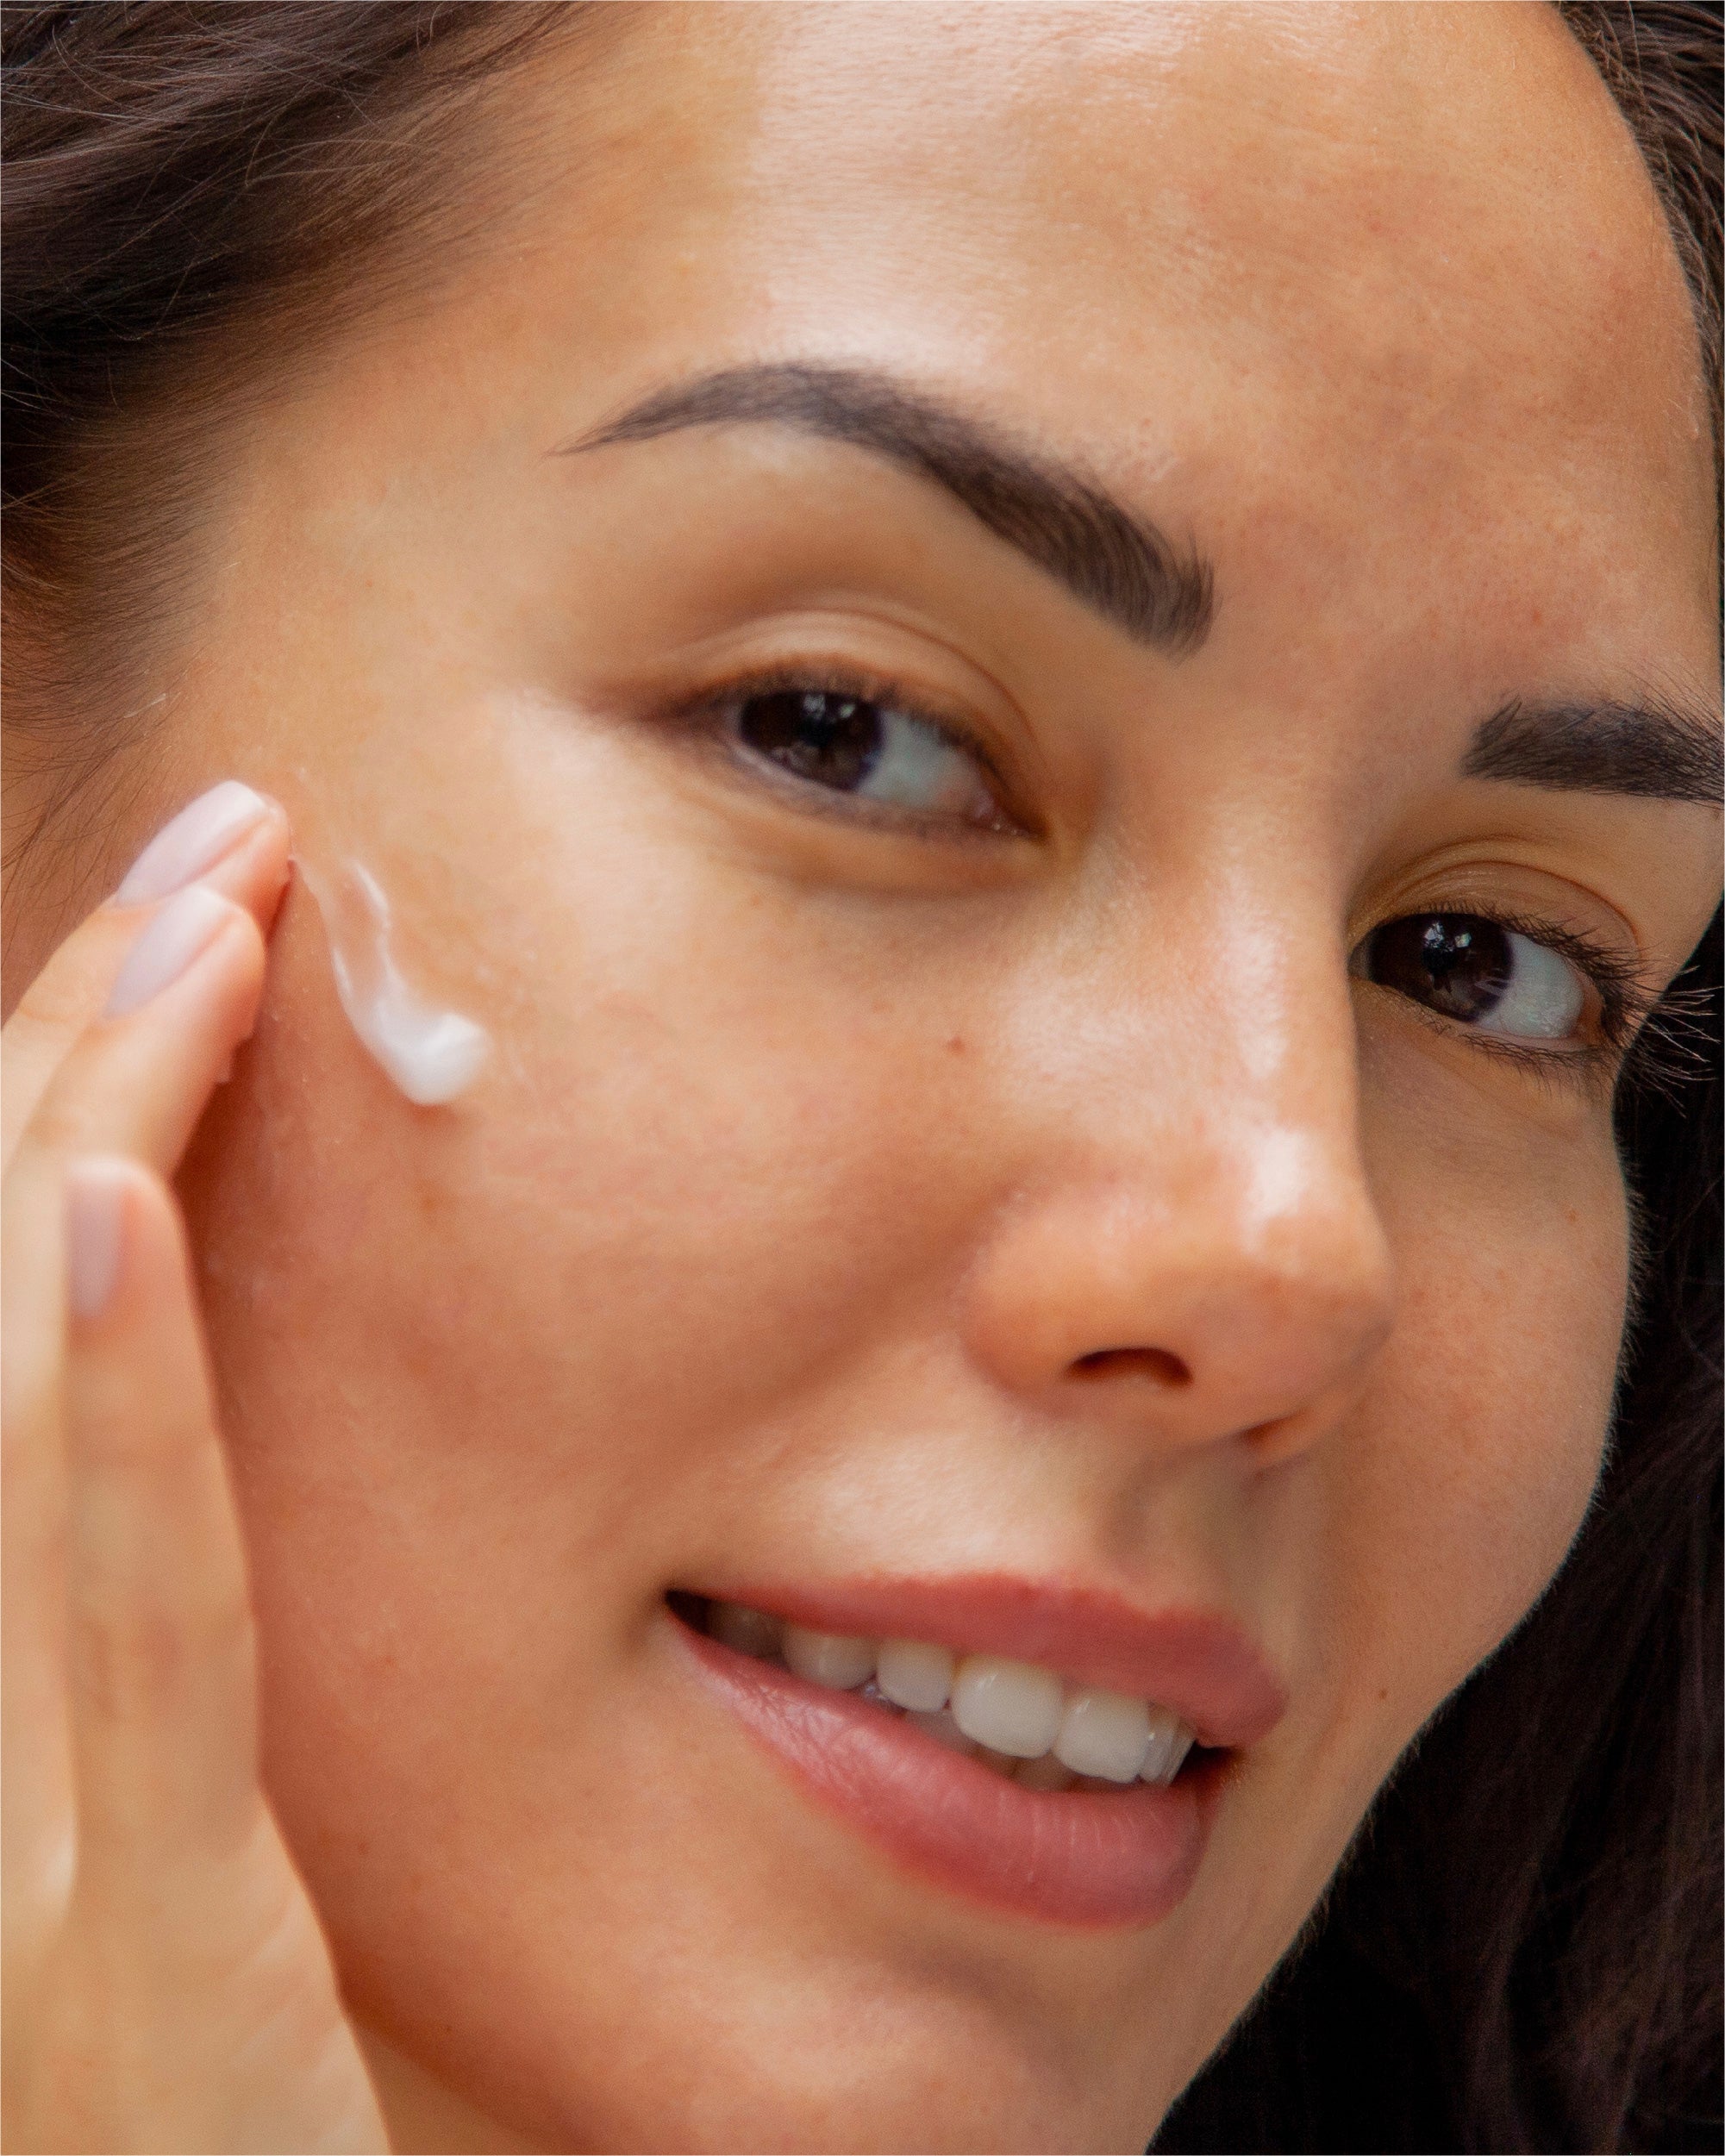 female apply water treatment moisturizer on her face